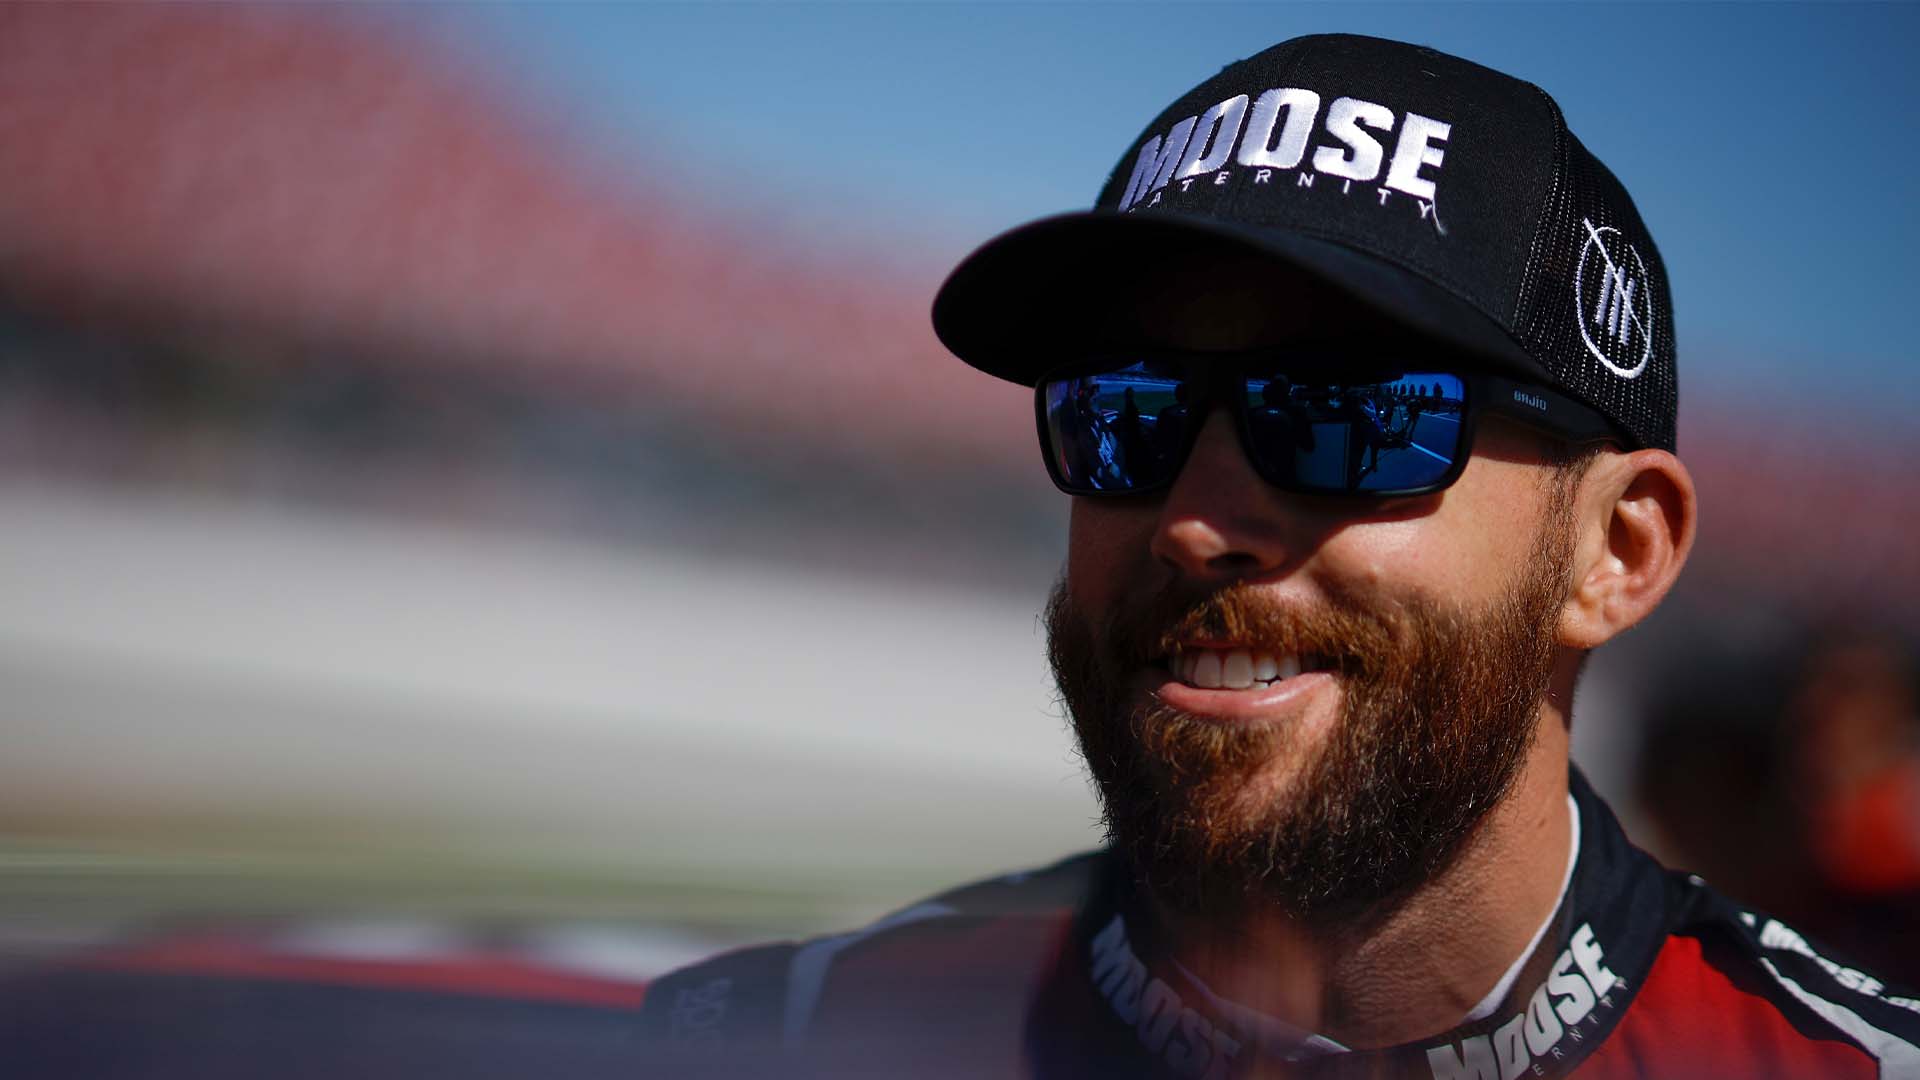 Hero or Heel? Ross Chastain Divides NASCAR More and More